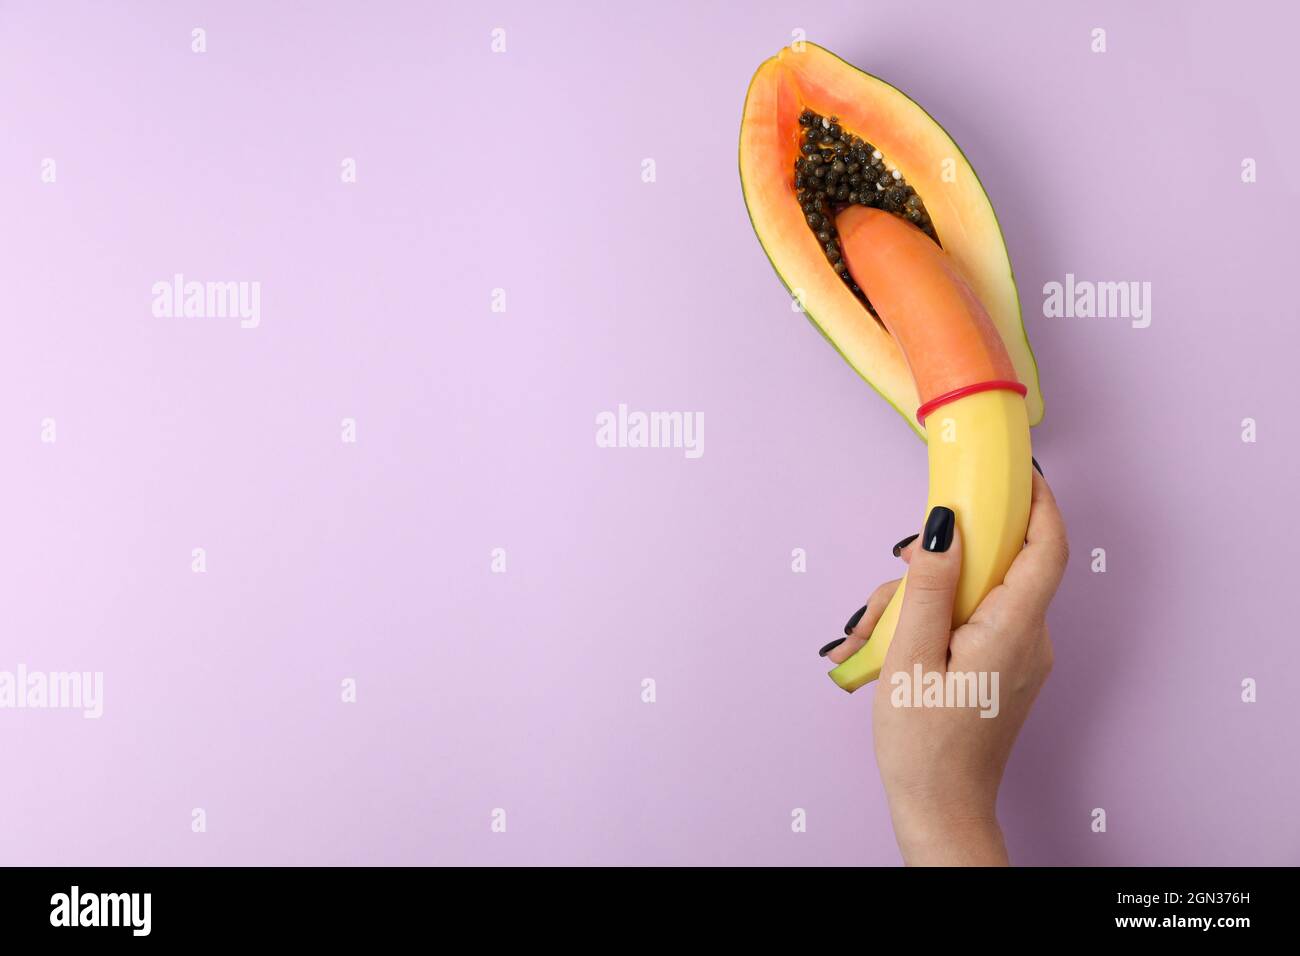 female-hand-holding-banana-with-condom-in-papaya-on-violet-background-2GN376H.jpg